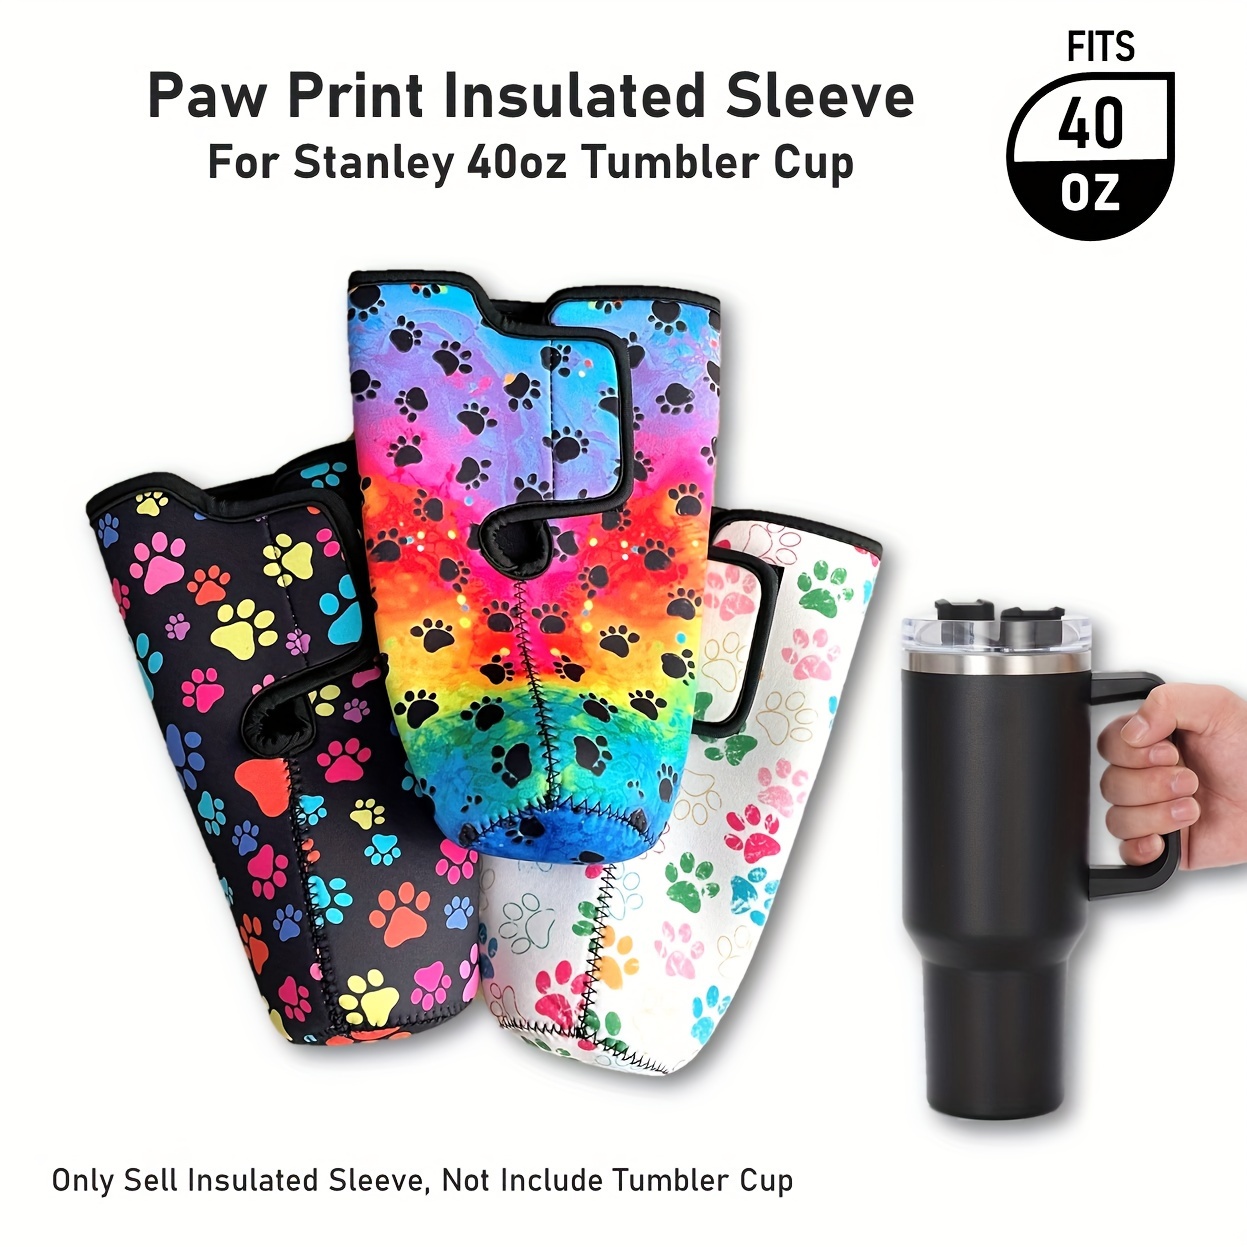 

1pc Cute Paw Printed Water Cup Sleeve, 40oz Neoprene Water Bottle Sleeve - Keep Your Tumbler Cup Insulated - Fits For 40oz Tumbler Cup